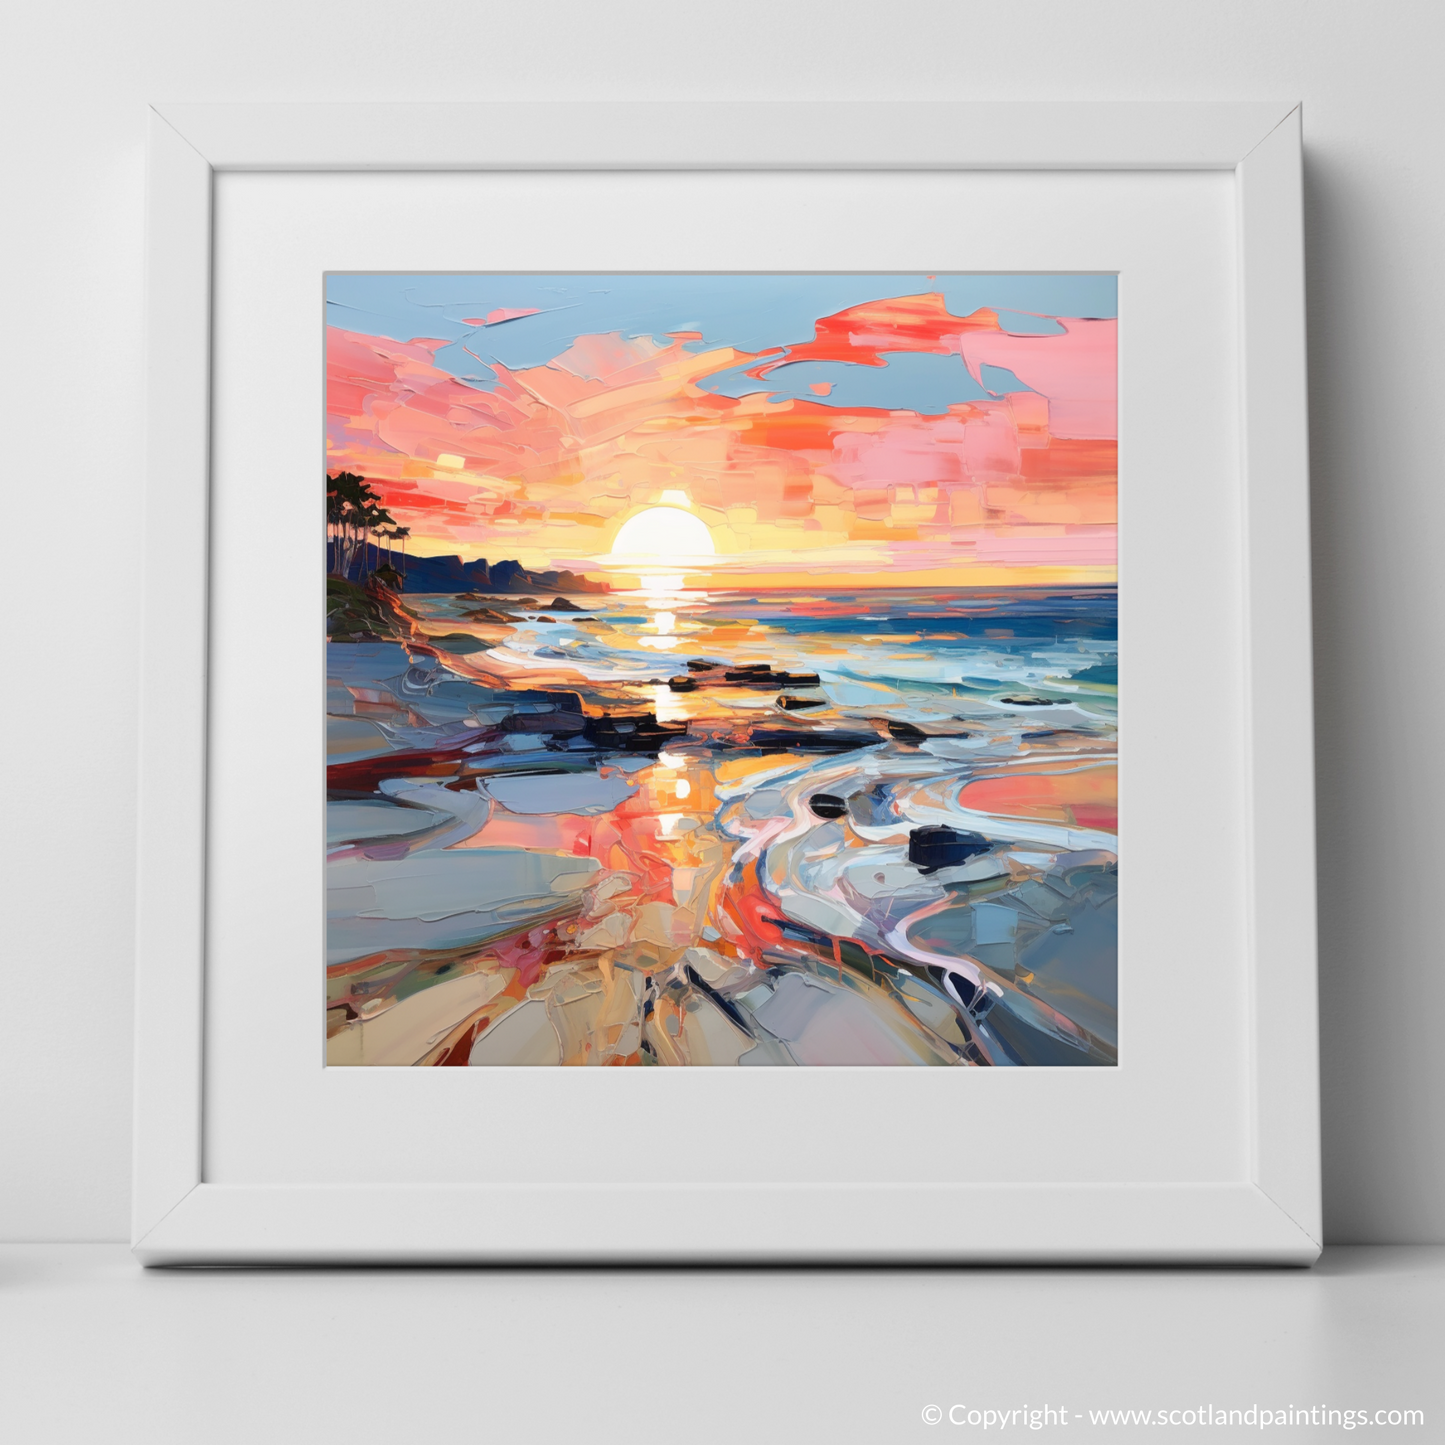 Art Print of Coral Beach at sunset with a white frame